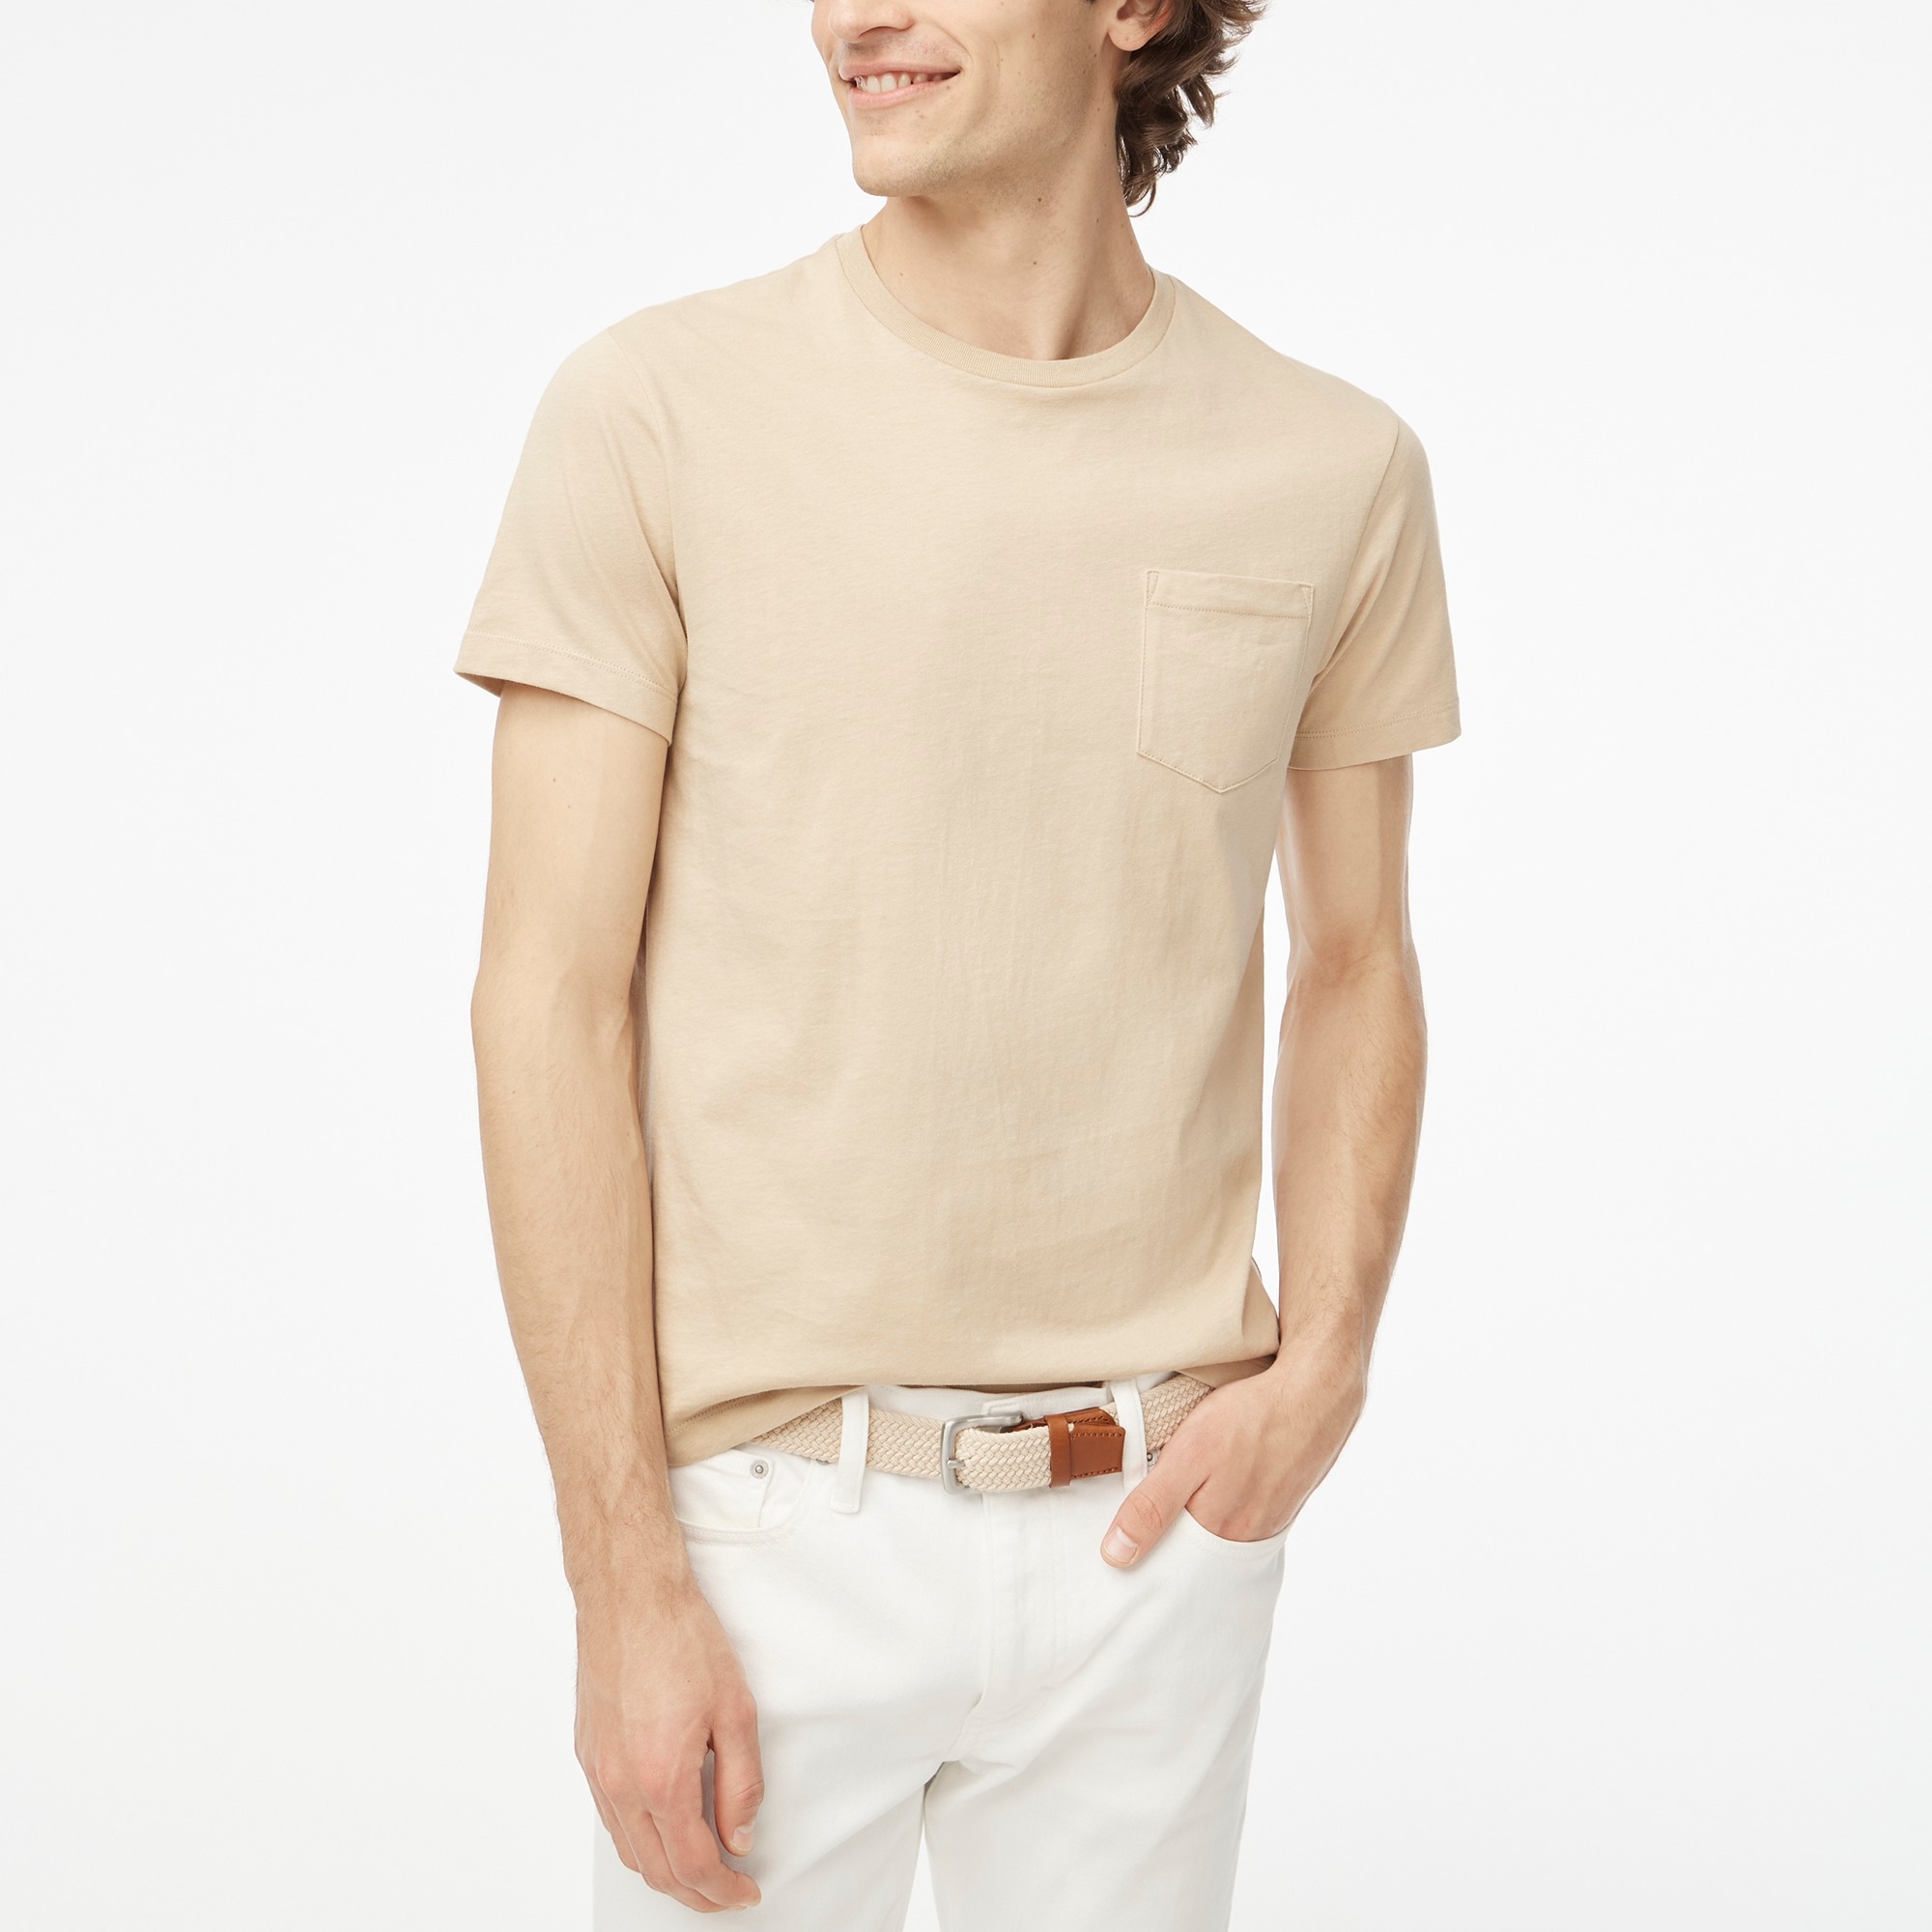 Jcrew Cotton washed jersey pocket tee